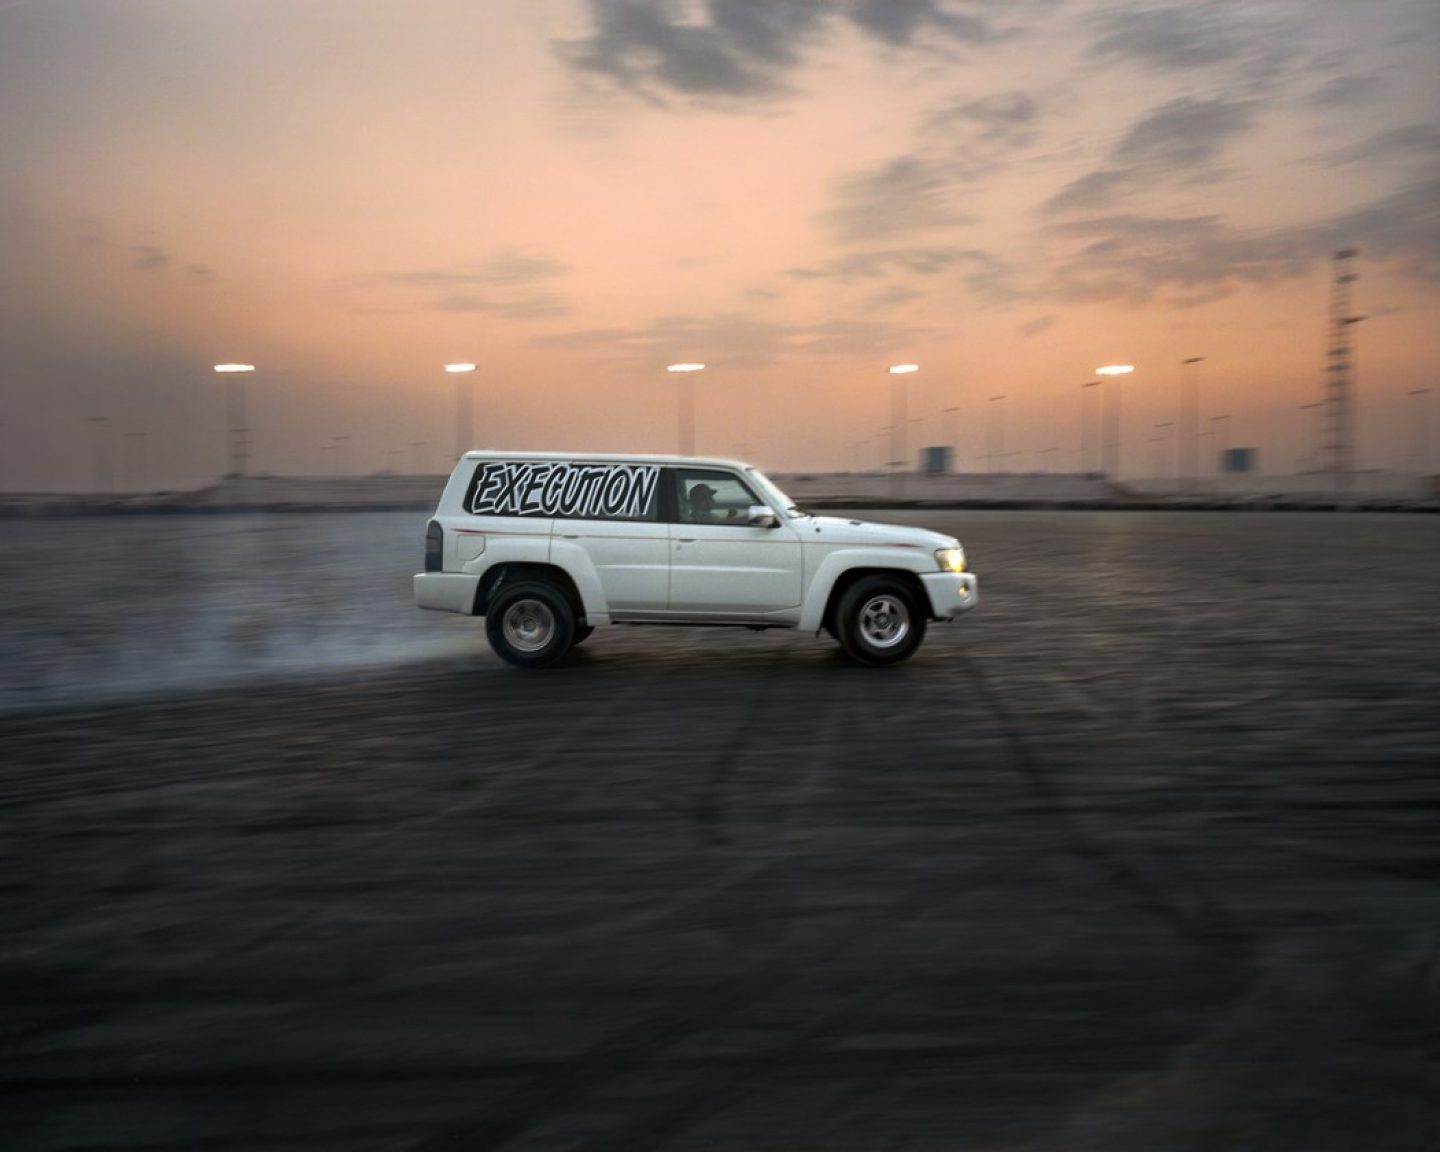 A member of the Execution group drifting in Umm Al Quwain, UAE.